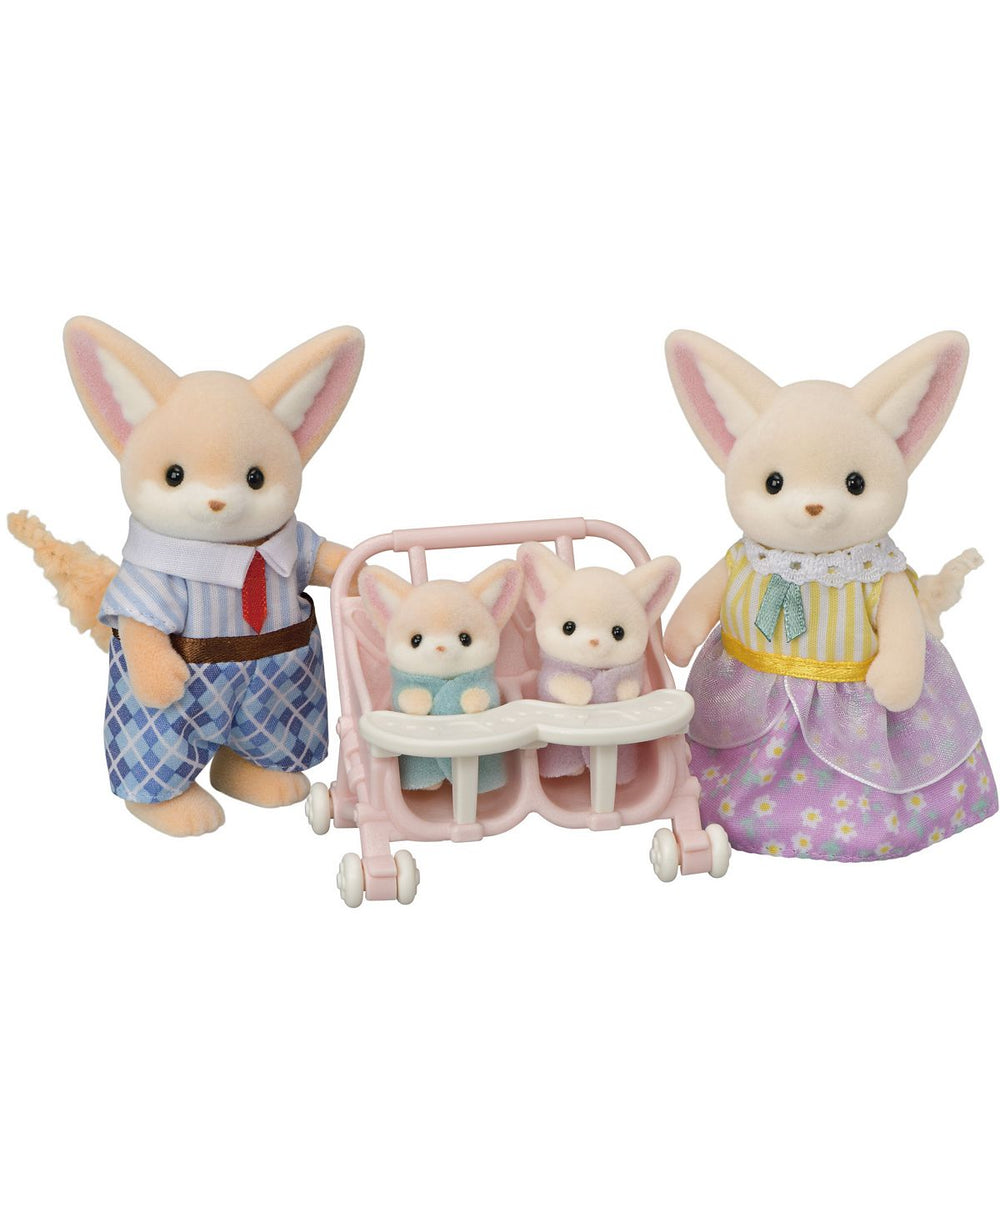 Calico Critters Fennec Fox Family - Collectable Doll Figures Set of 4